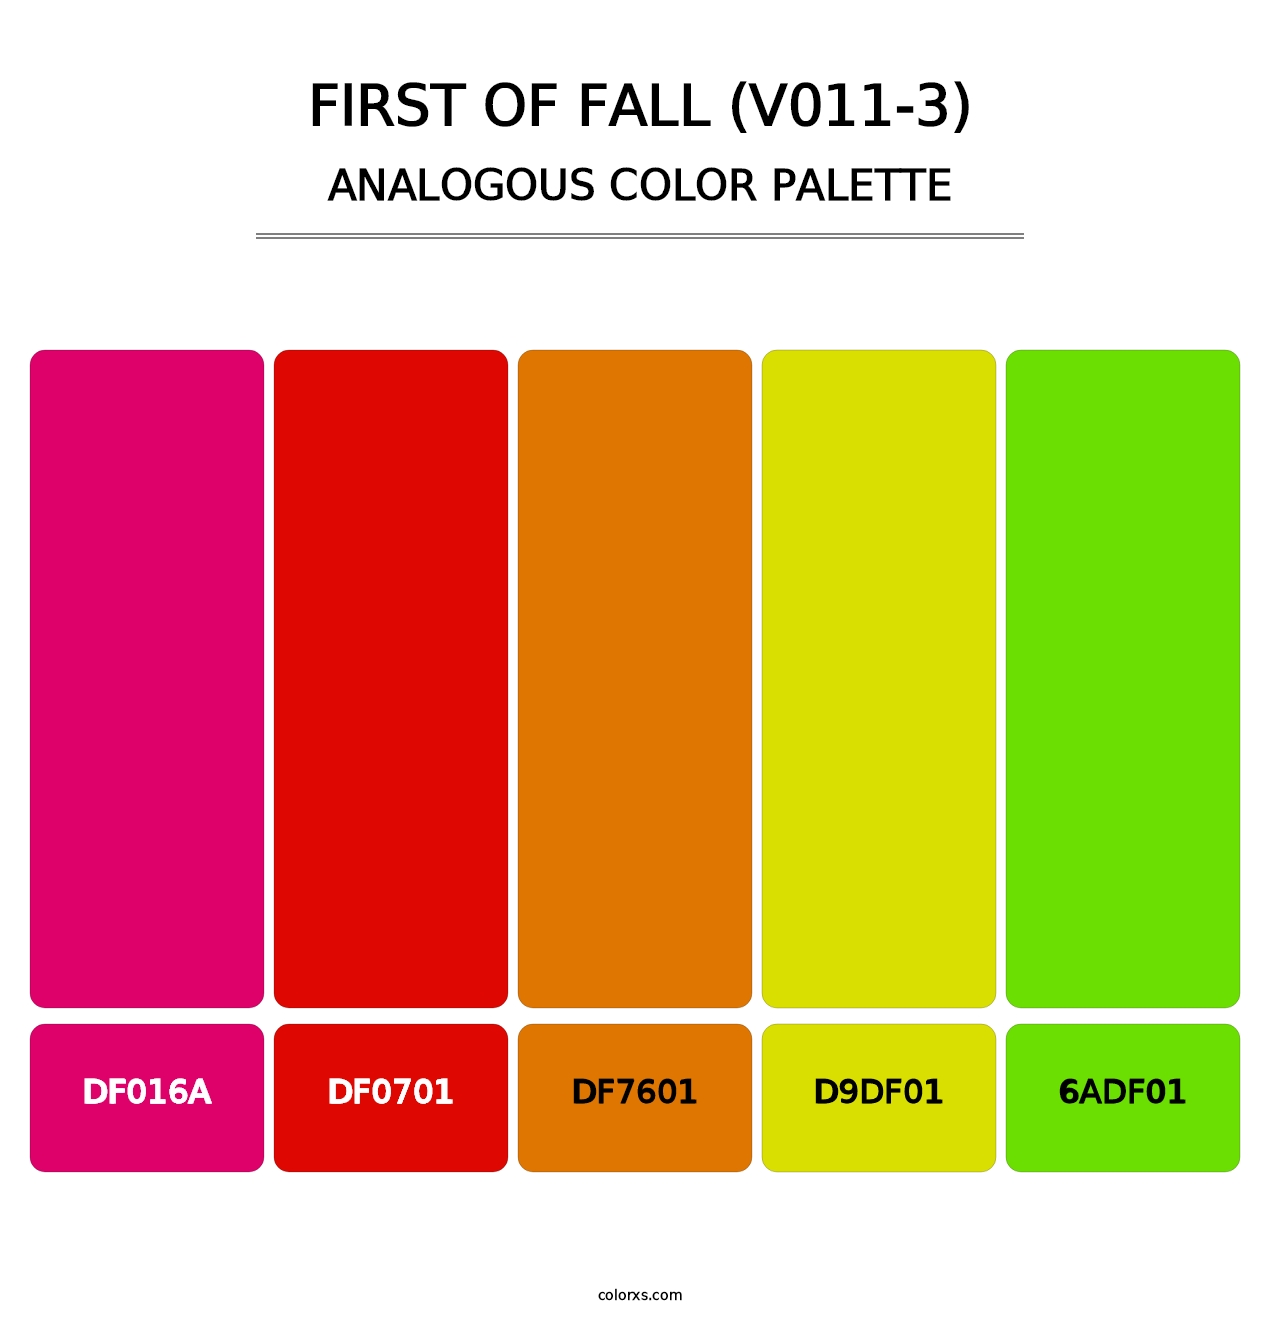 First of Fall (V011-3) - Analogous Color Palette